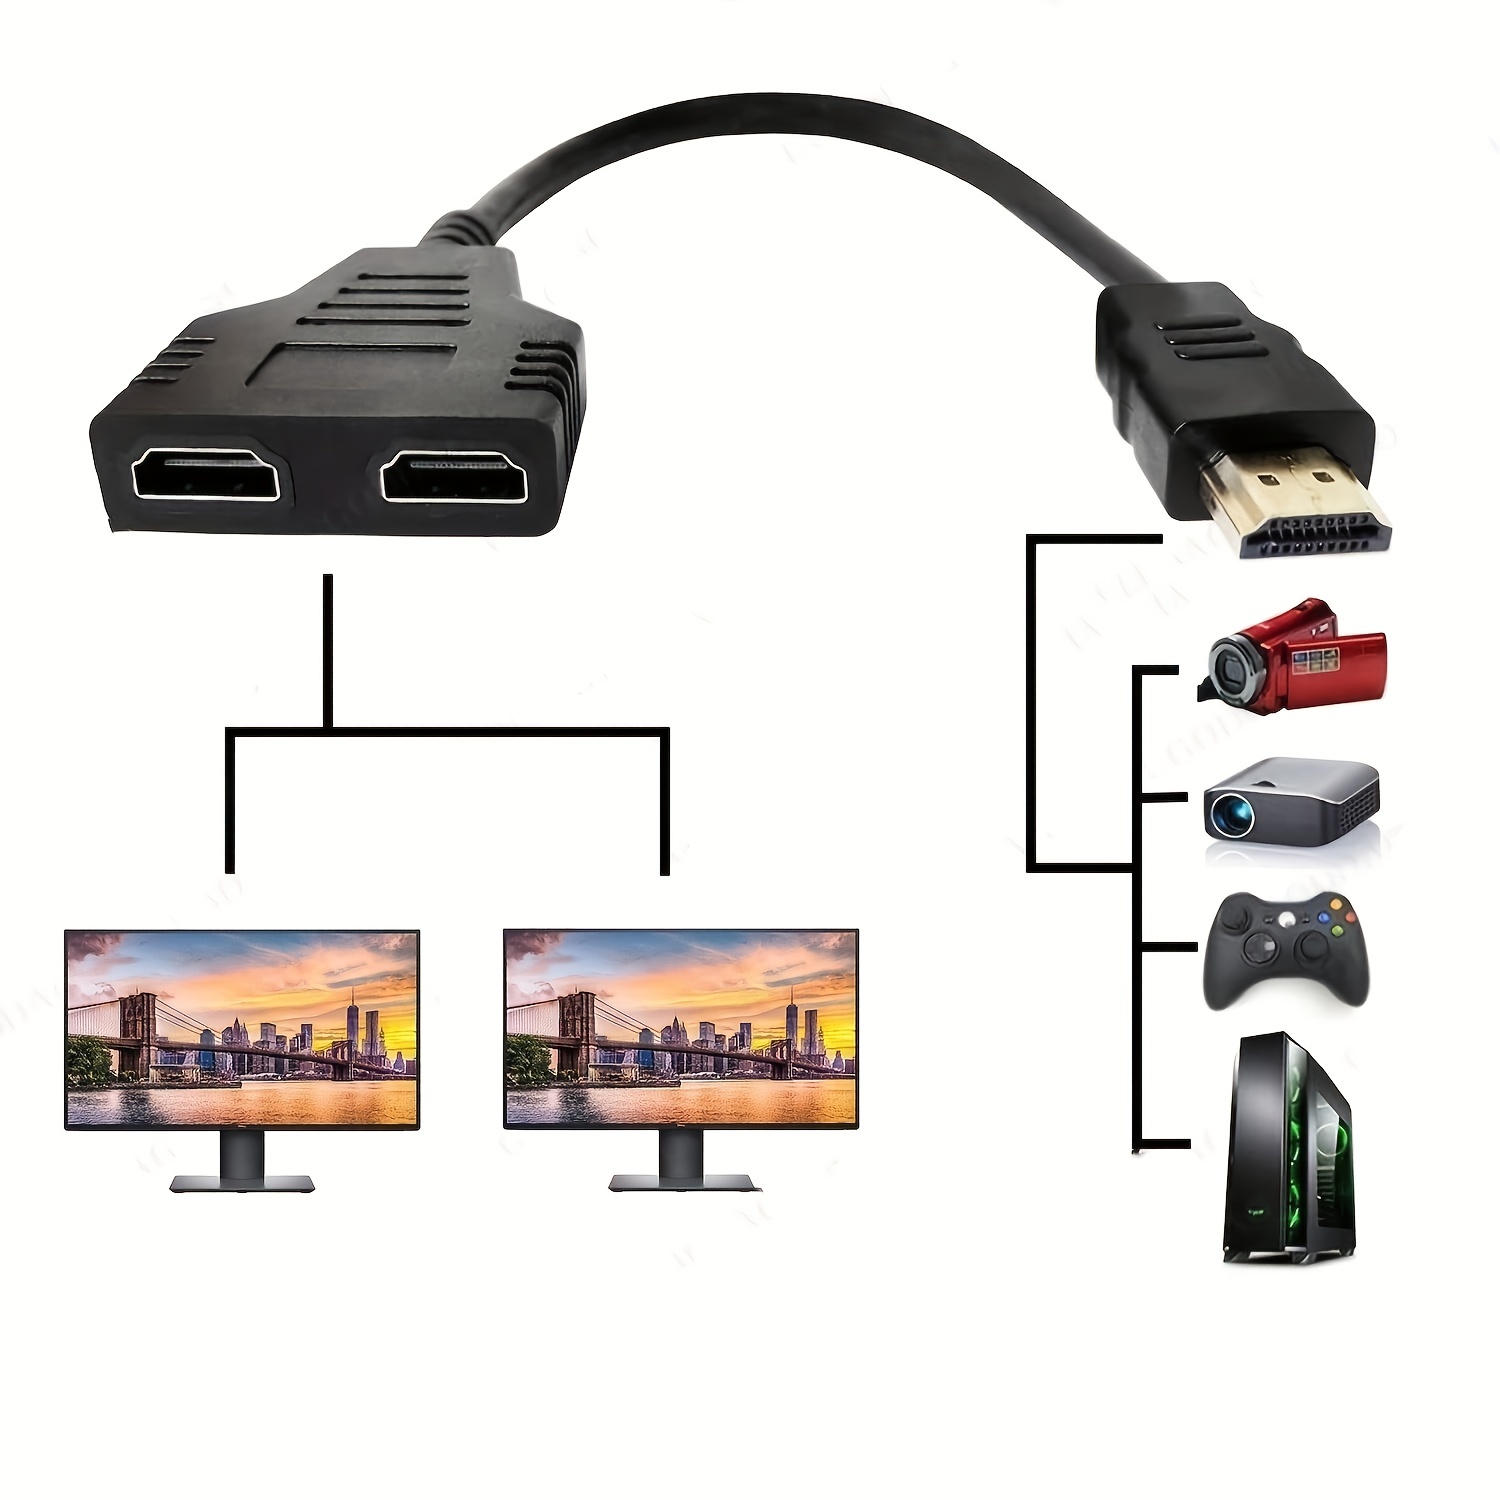  HDMI Cable Splitter 1 in 2 Out HDMI Adapter Cable HDMI Male to Dual  HDMI Female 1 to 2 Way, Support Two TVs at The Same Time, Signal One In Two  Out : Electronics